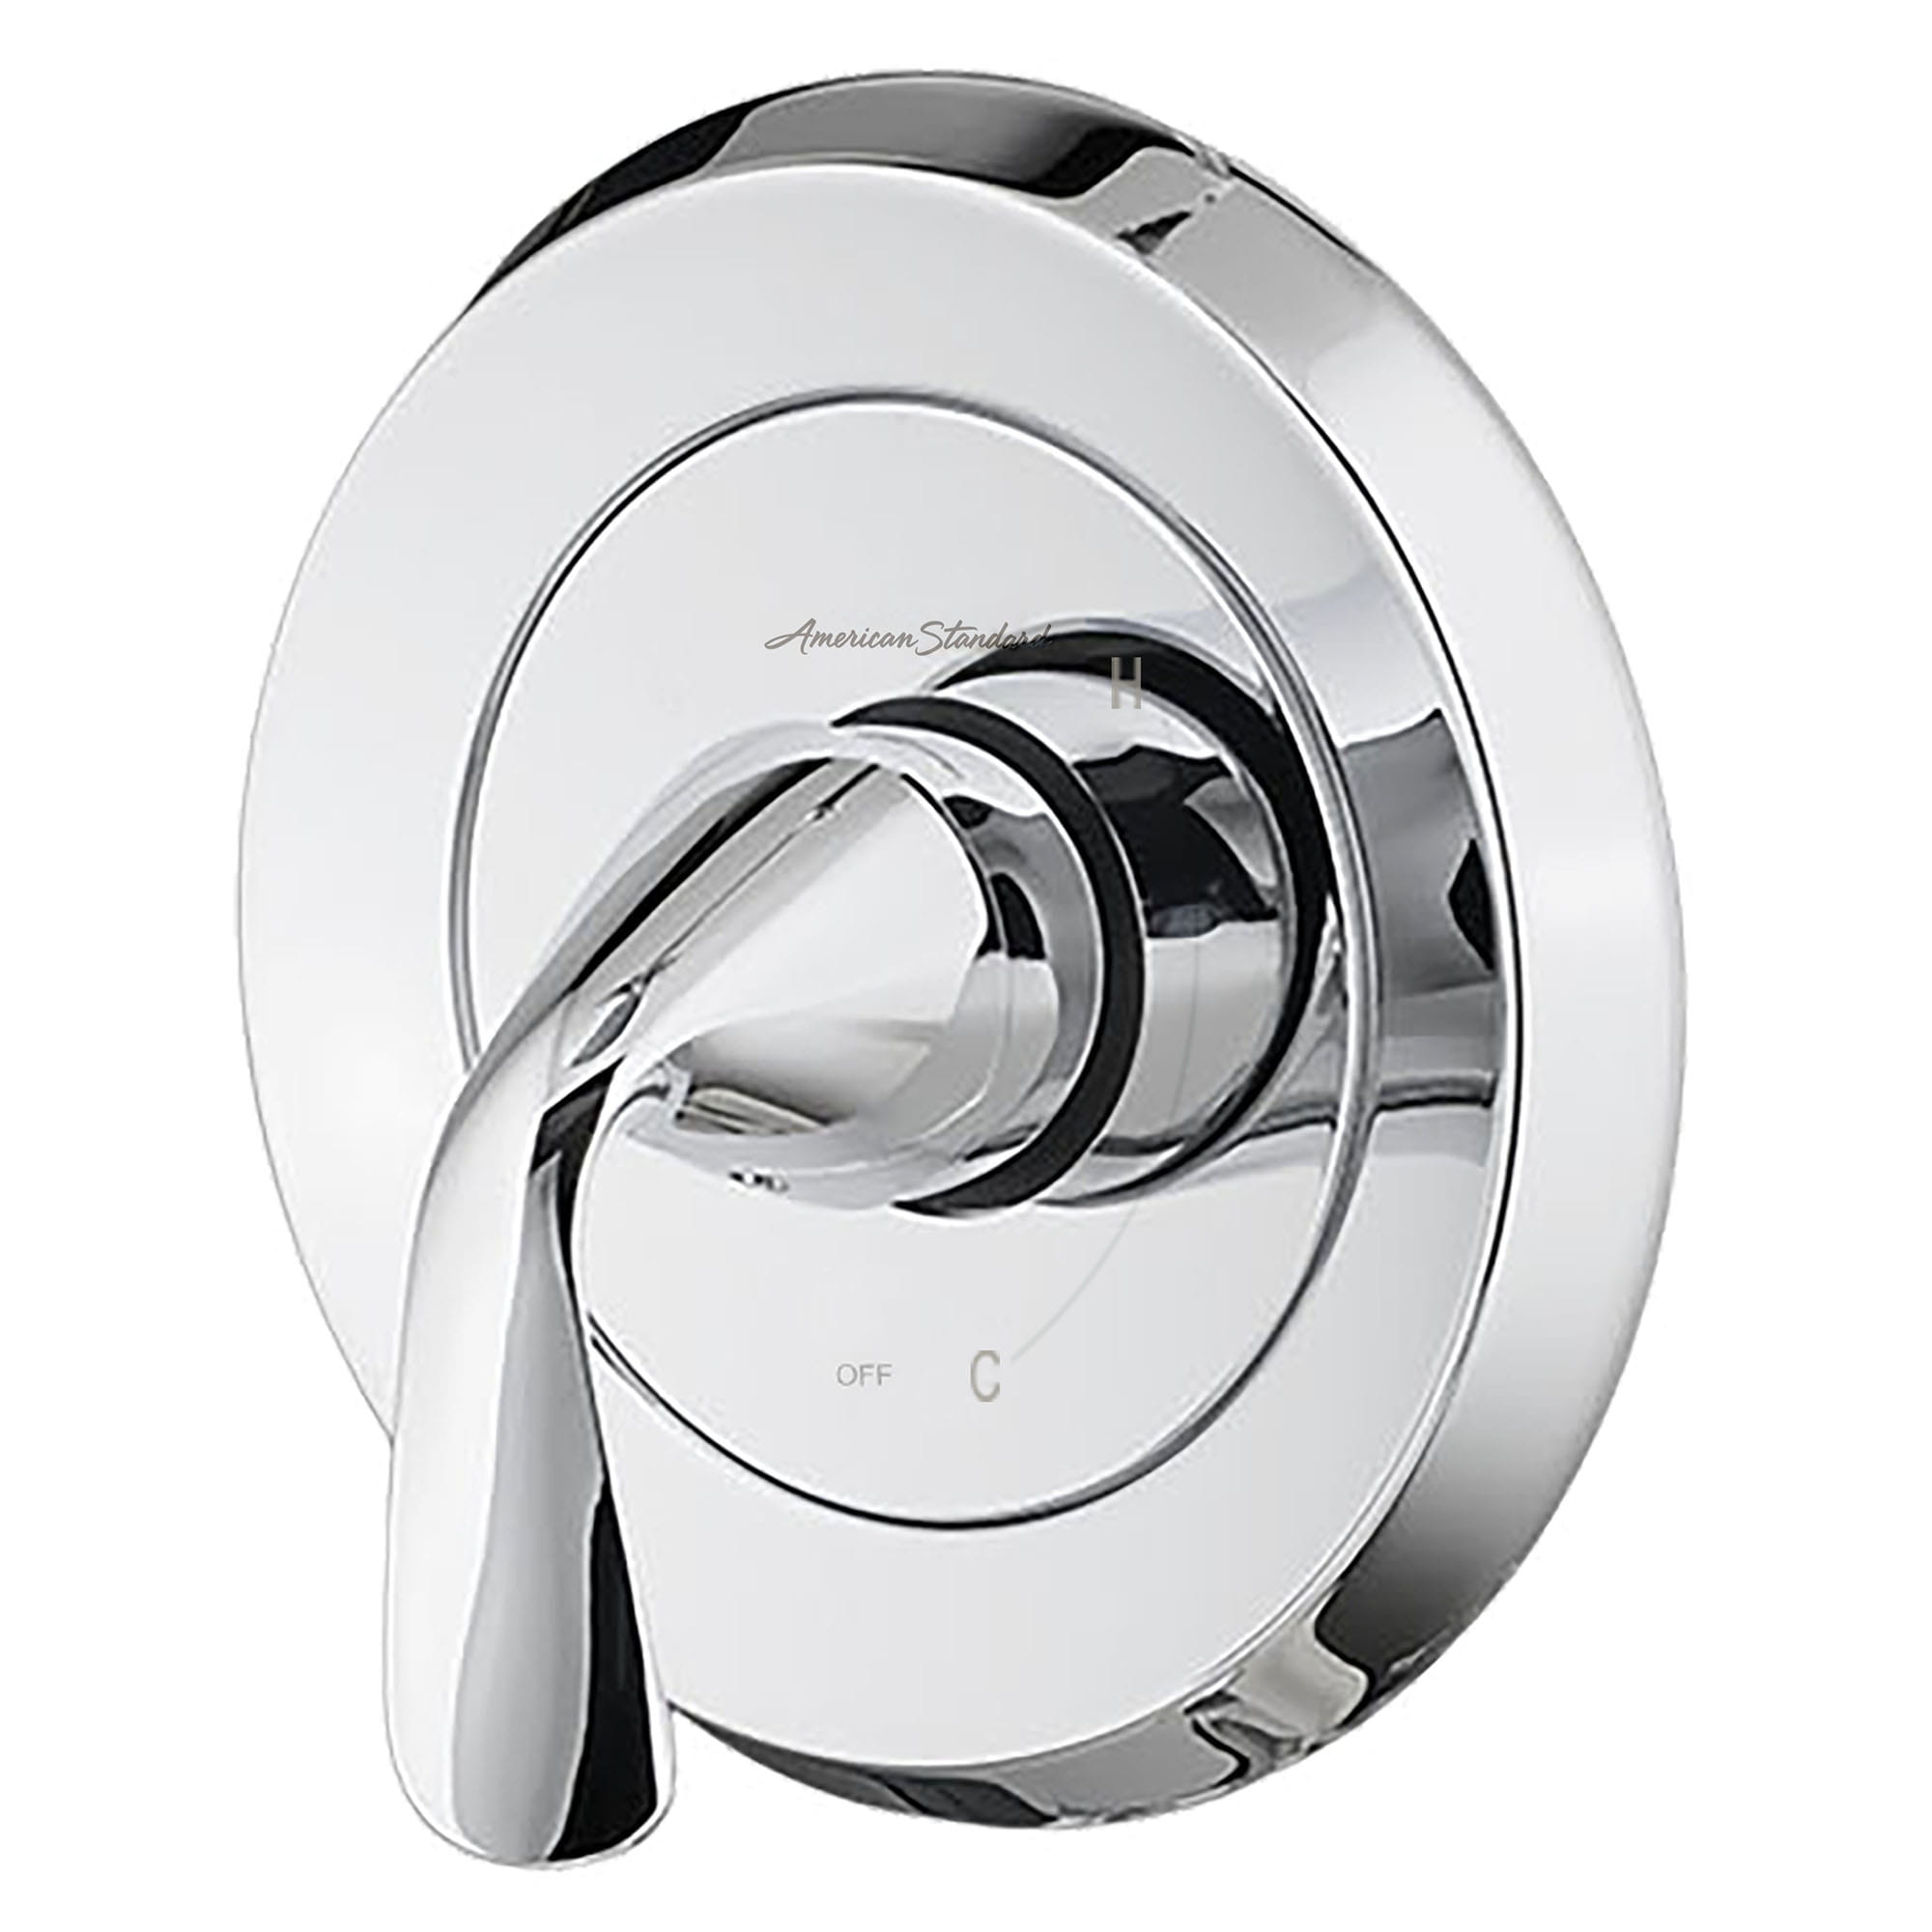 Fluent Valve Only Trim Kit With Double Ceramic Pressure Balance Cartridge With Lever Handle CHROME